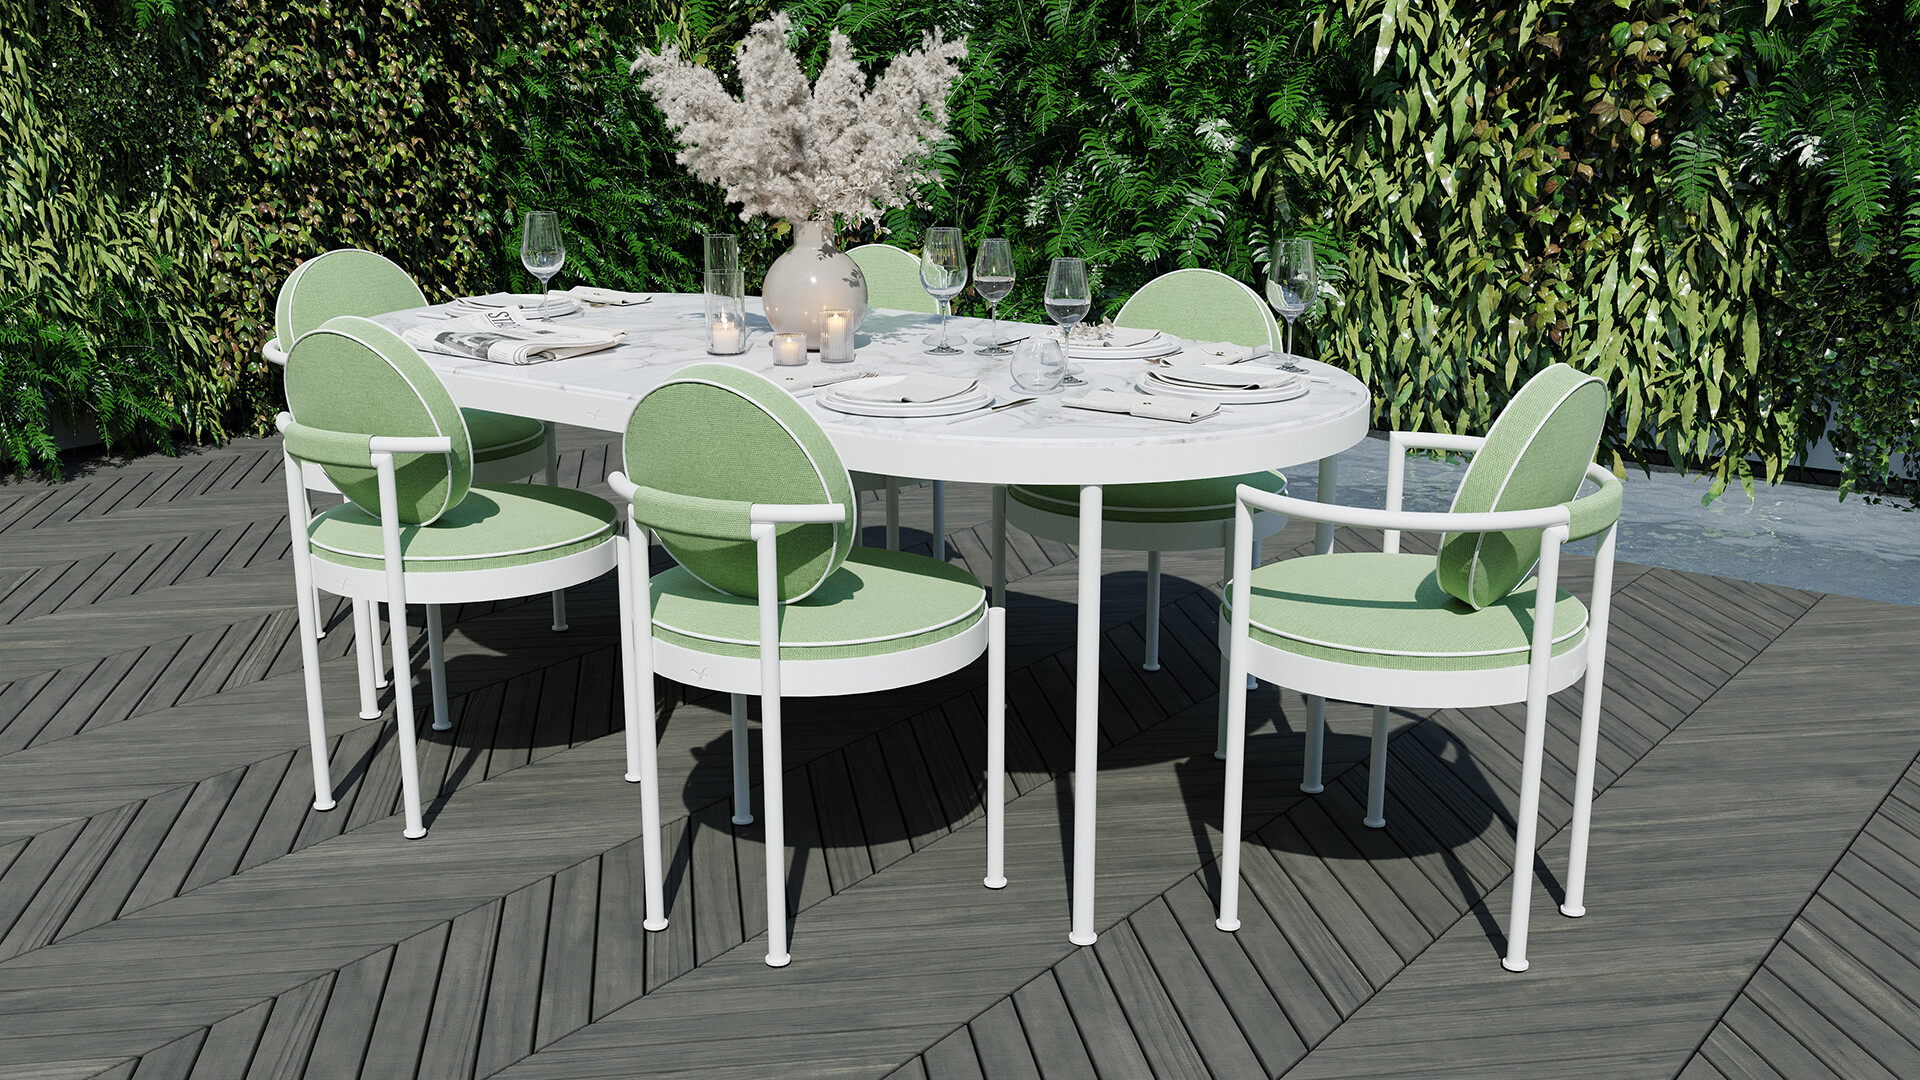 Rattan Furniture Is Available Online In Australia At The Styling Republic